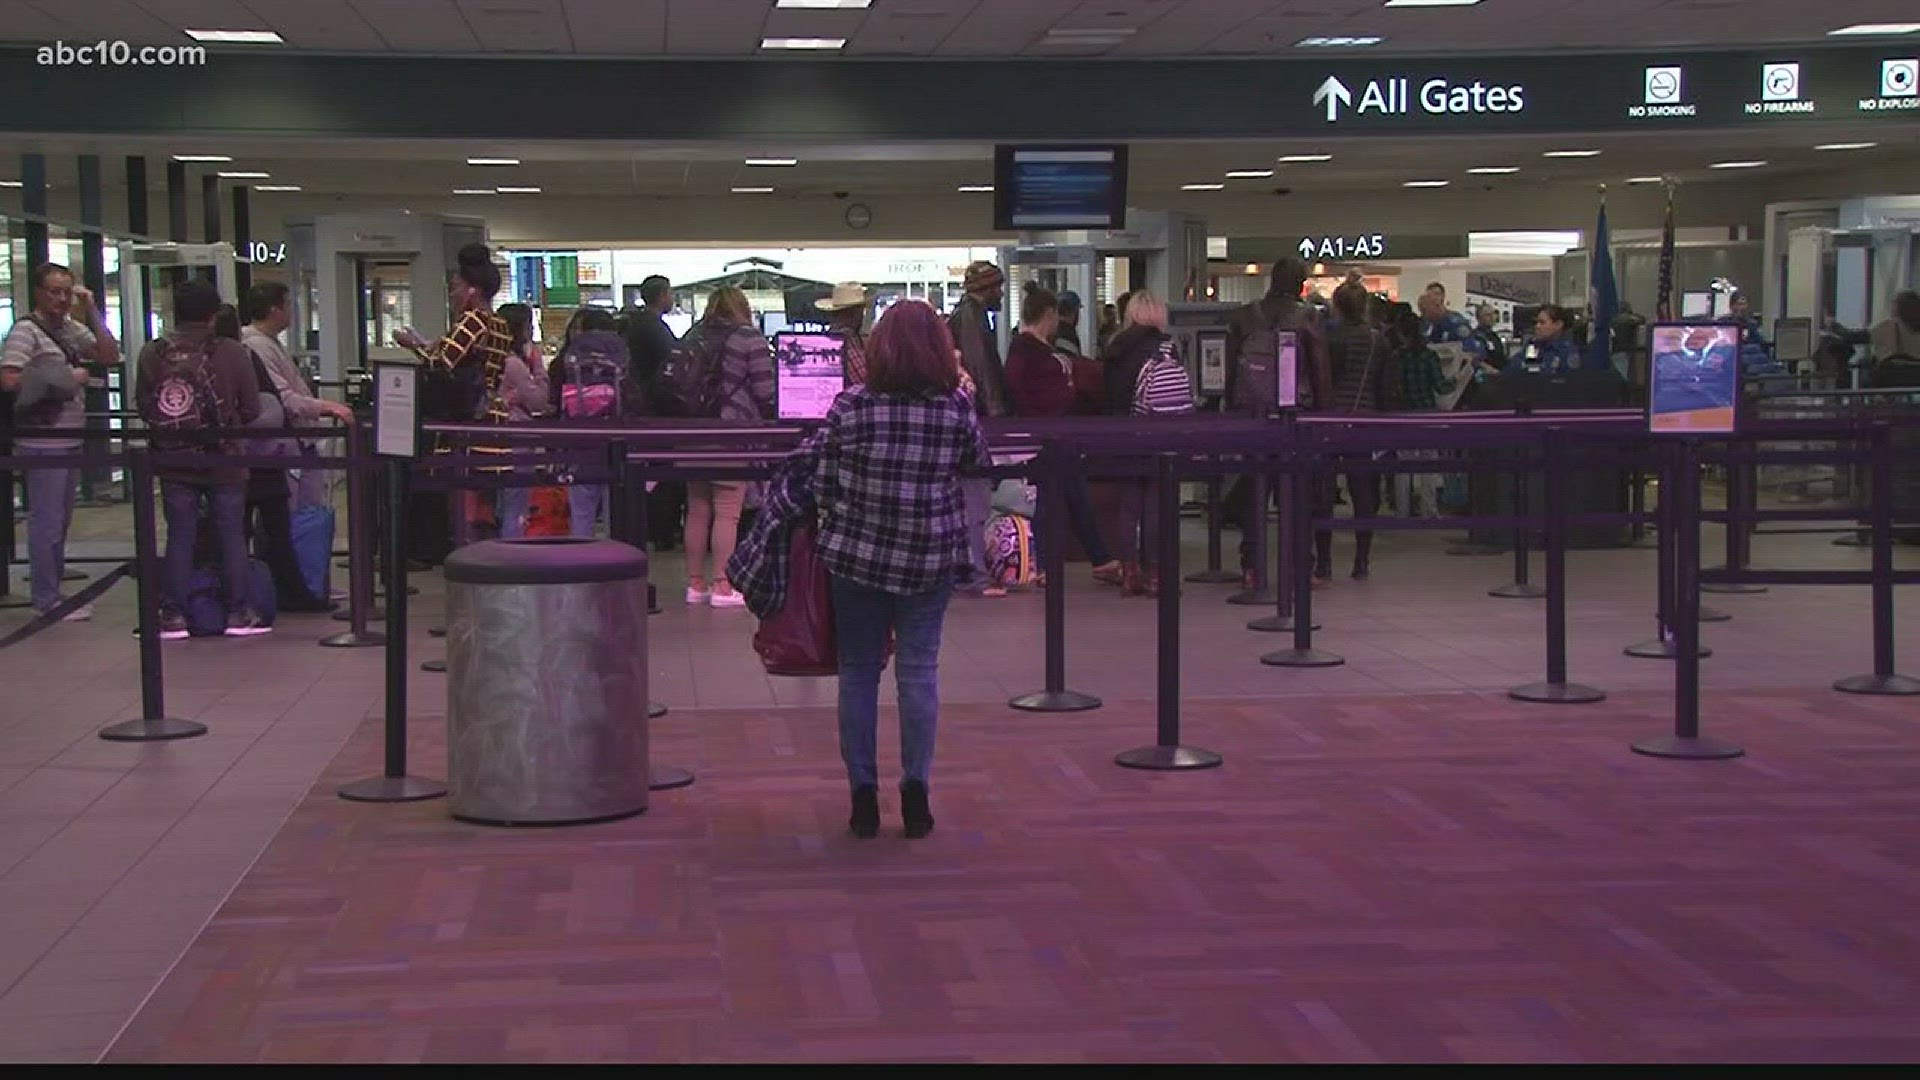 New screening procedures at airports are causing longer lines ahead of the holidays.